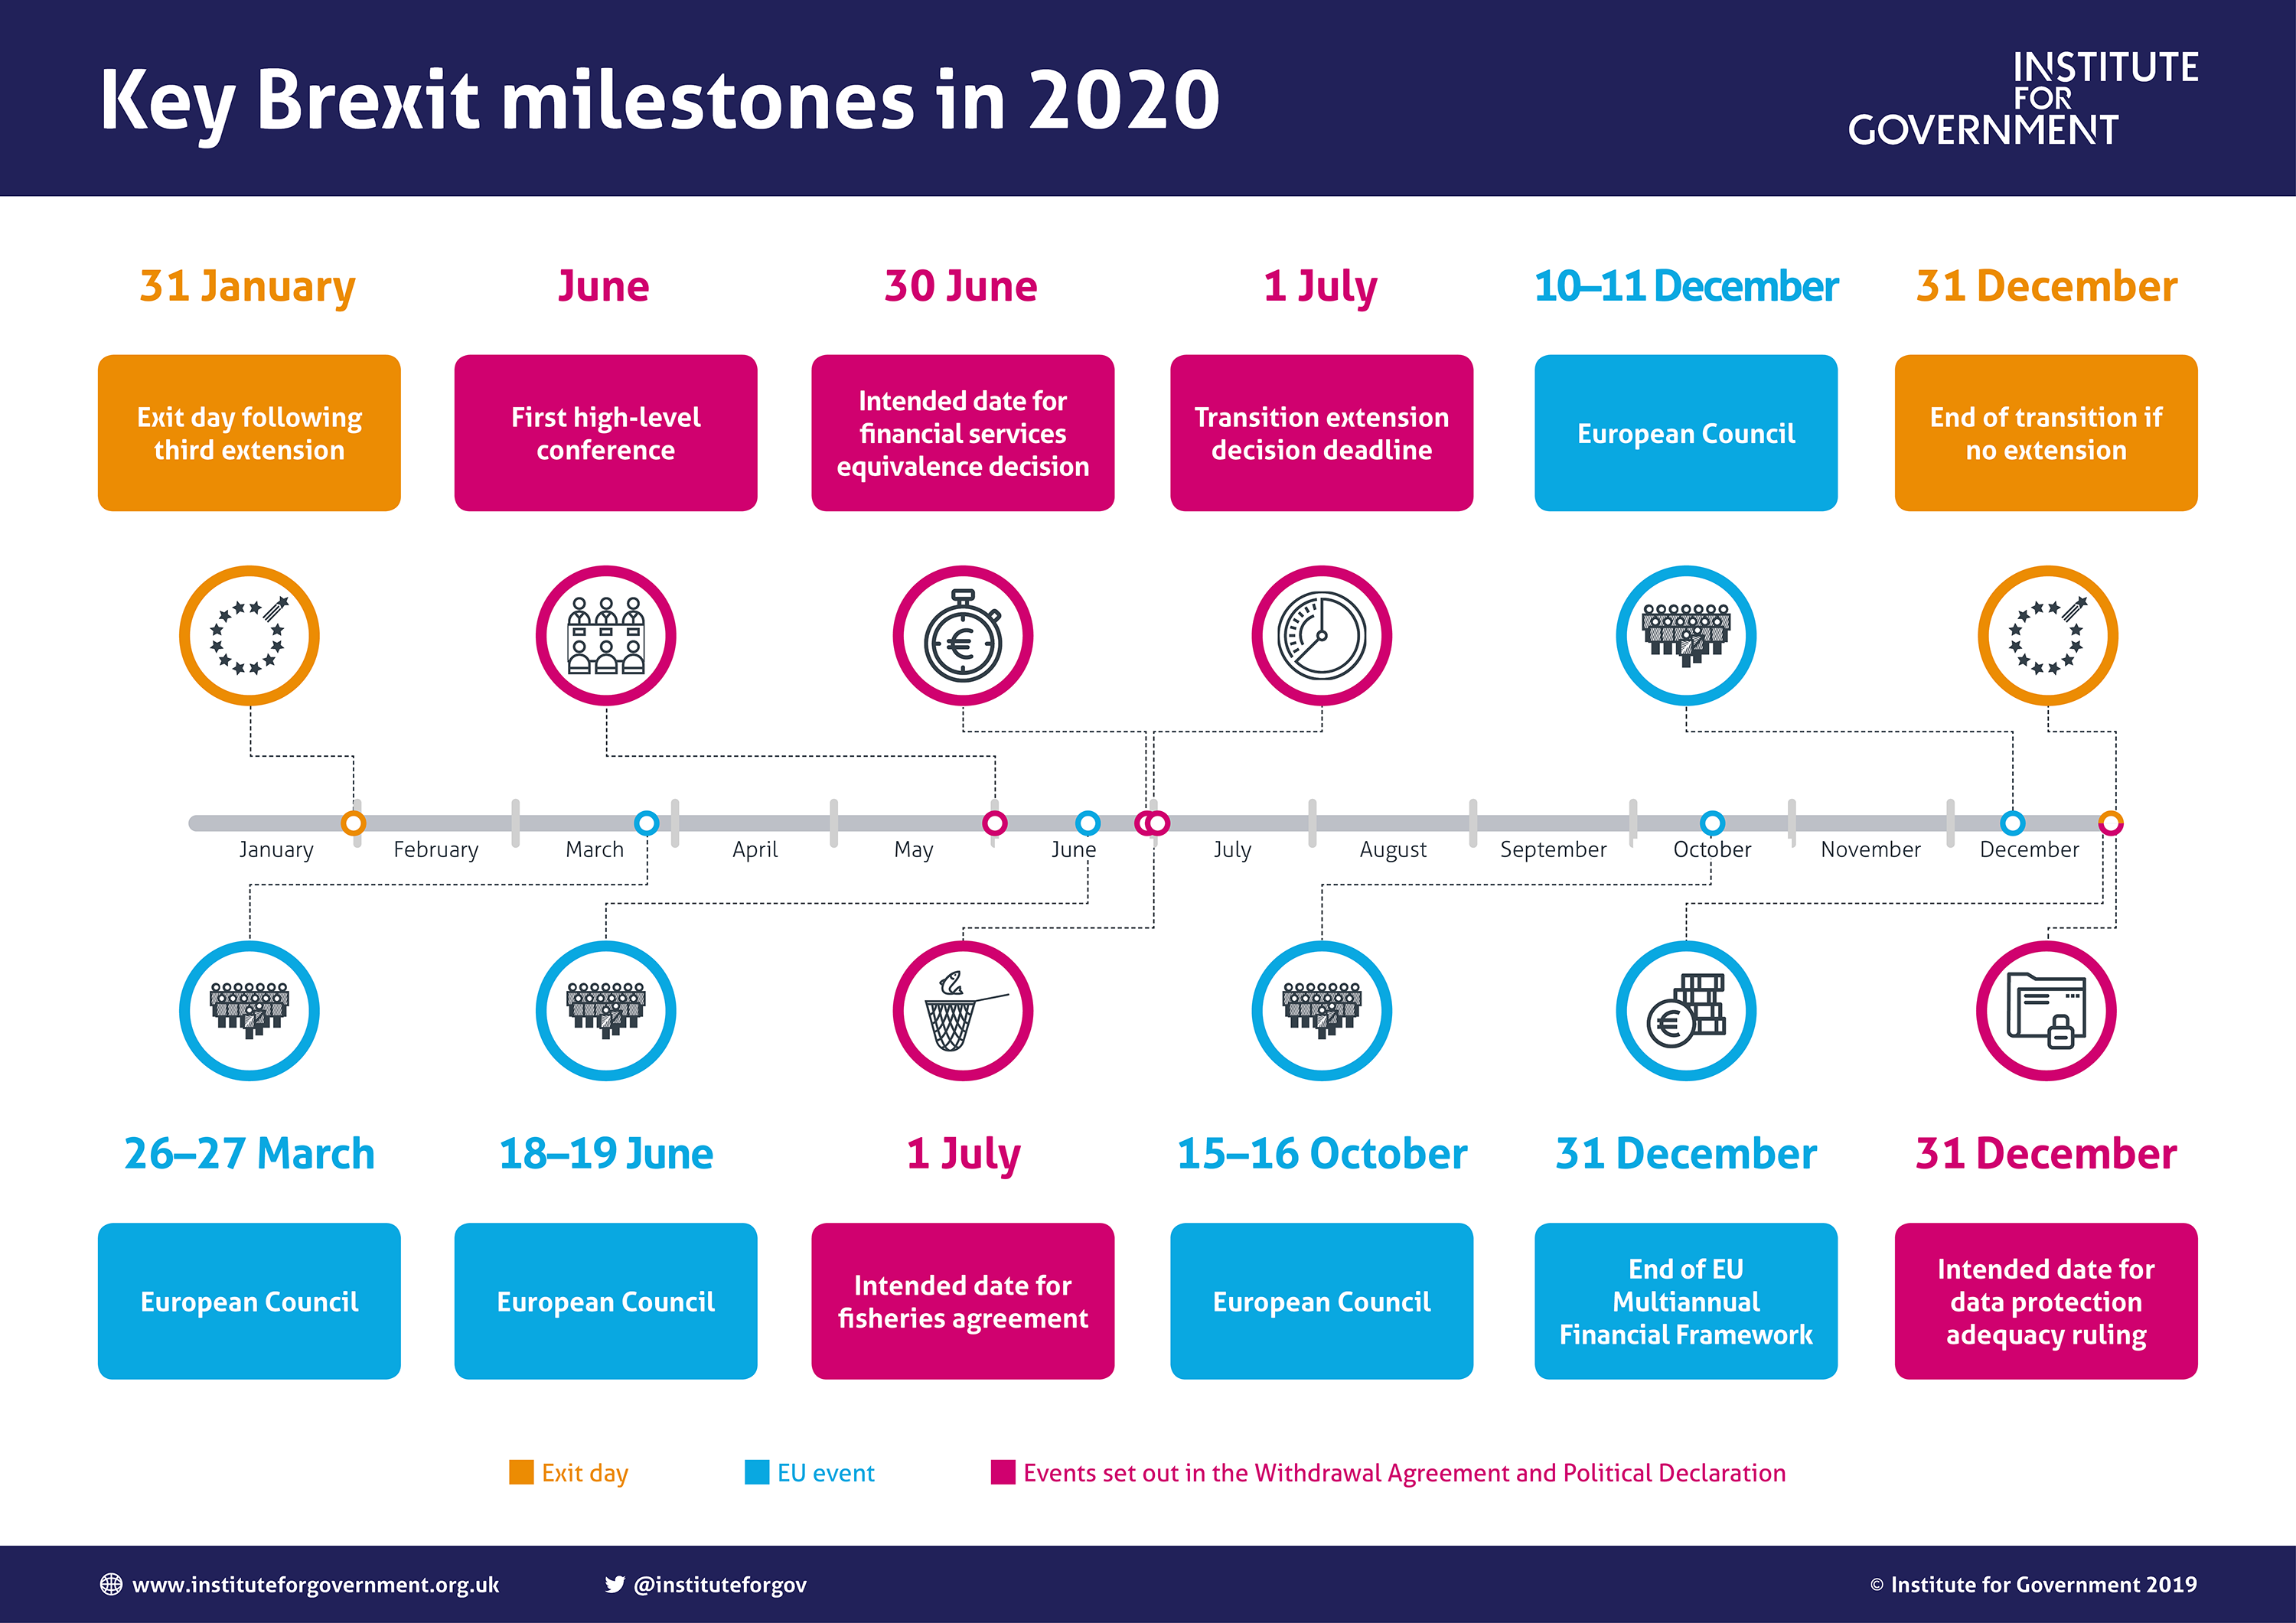 Brexit Milestones in 2020.  Jan 31 = Exit Day.  March 26-27 = European Council.  June = First high level conference.  June 18-19 = European Council.  June 30 = Financial Services Equivalence Decision.  July 1 = Fisheries Agreement.  July 1 = Transition extension decision deadline.  October 15-16 = European Council.  December 10-11 = European Council.  December 31 = End of EU Multiannual Financial Framework.  December 31 = Data protection adequacy ruling.  December 31 = End of transition if no extension.